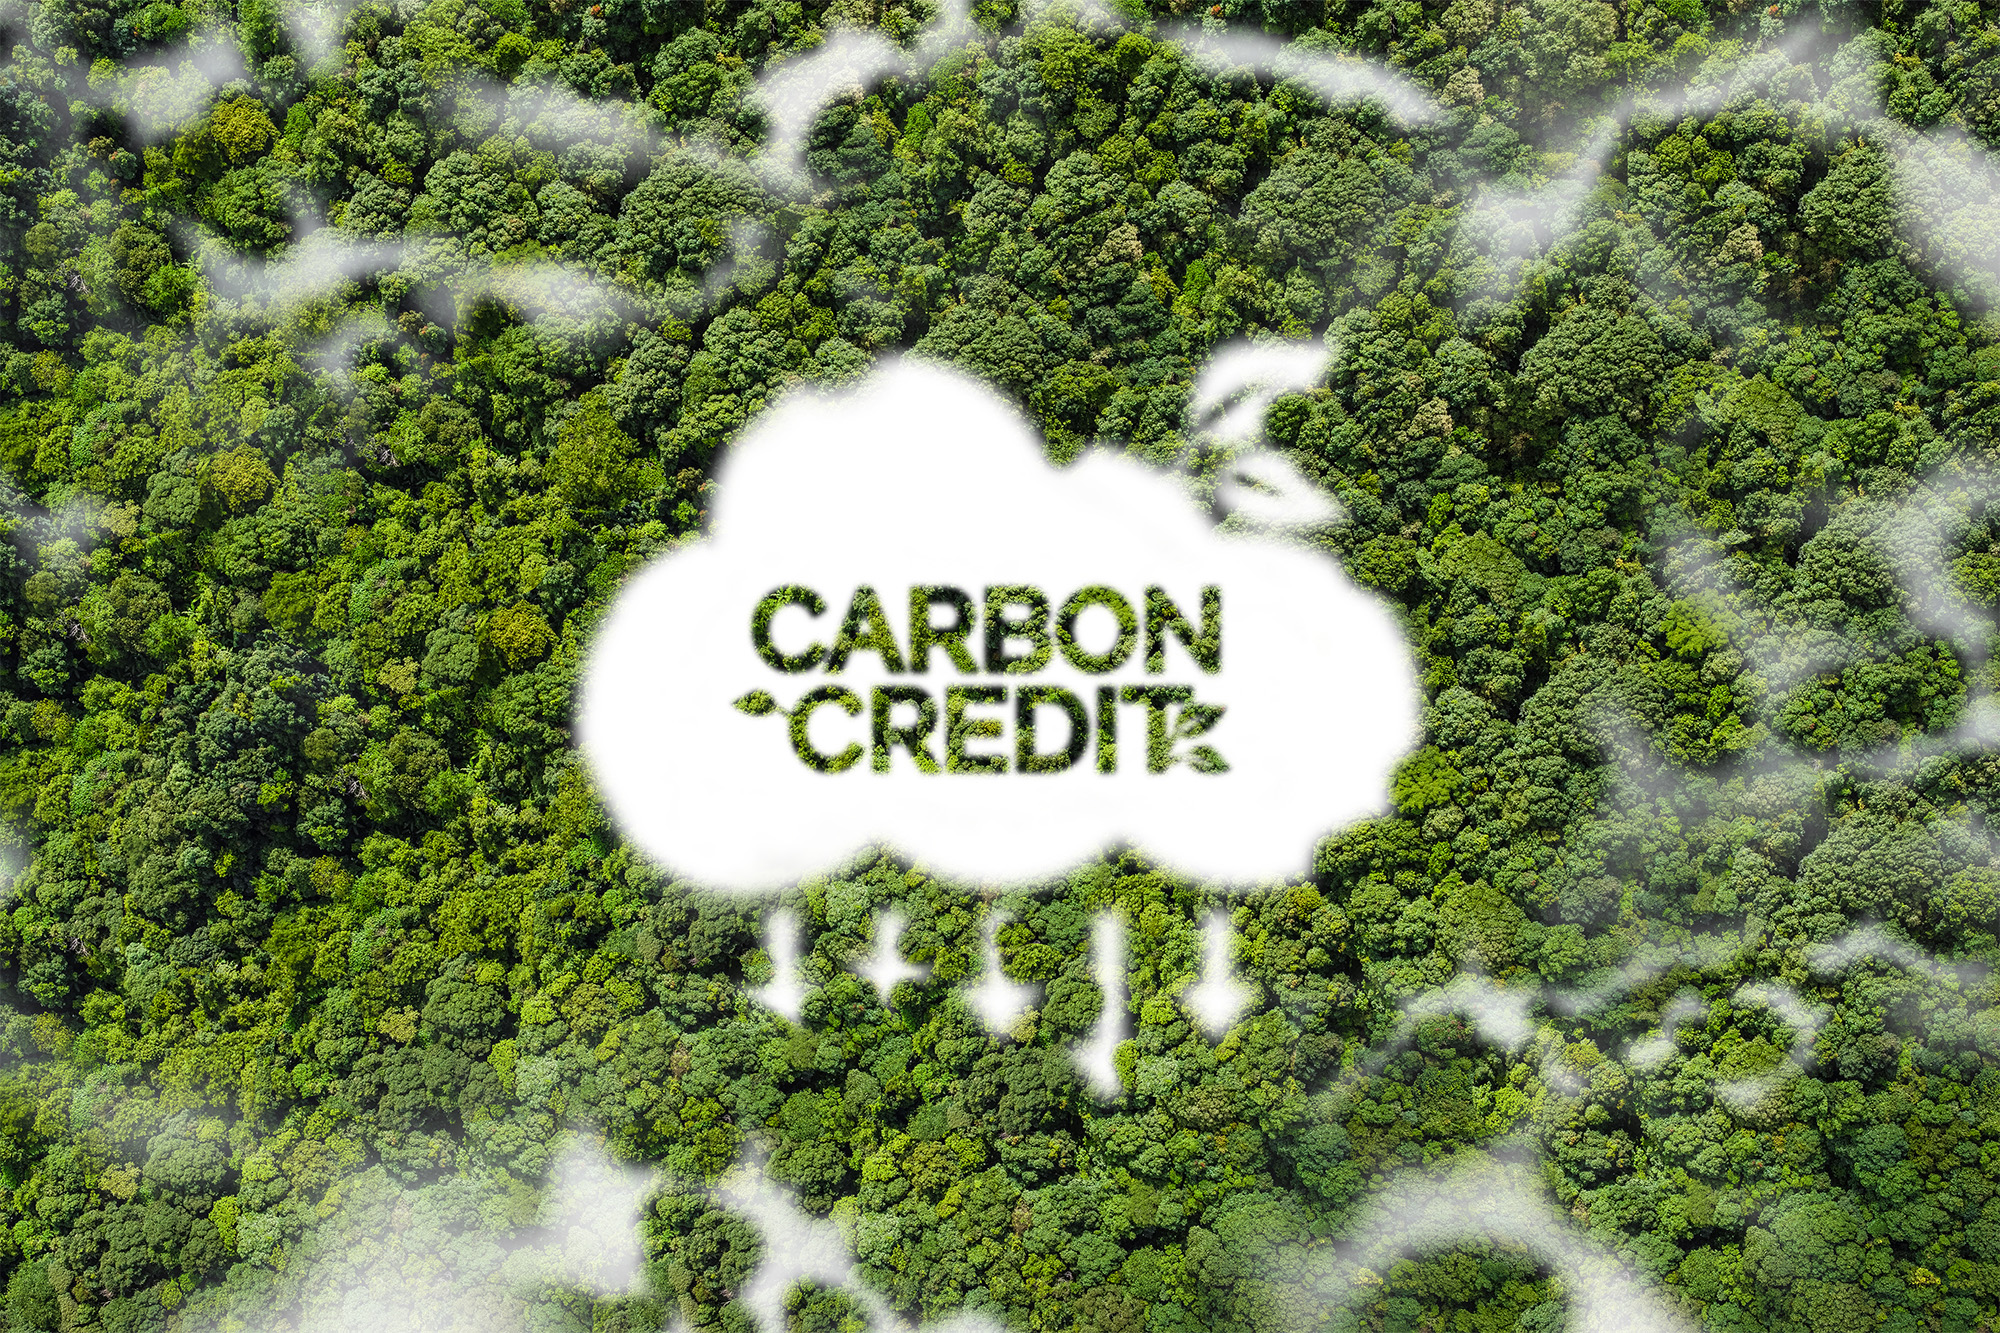 Explained: Carbon credits